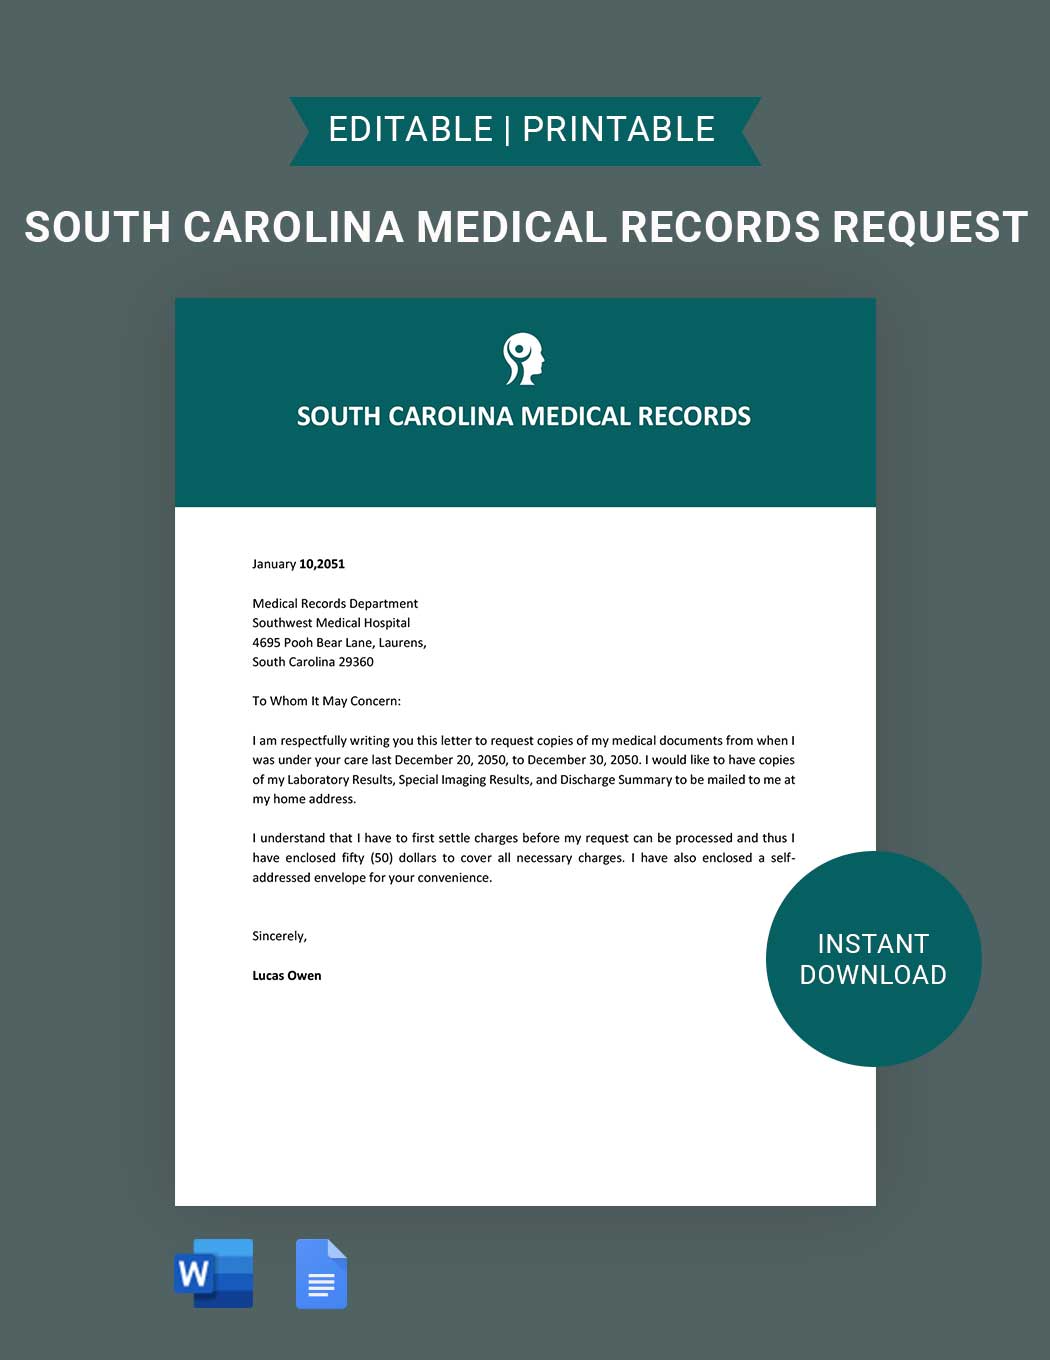 South Carolina Medical Records Request Template in Word, Google Docs